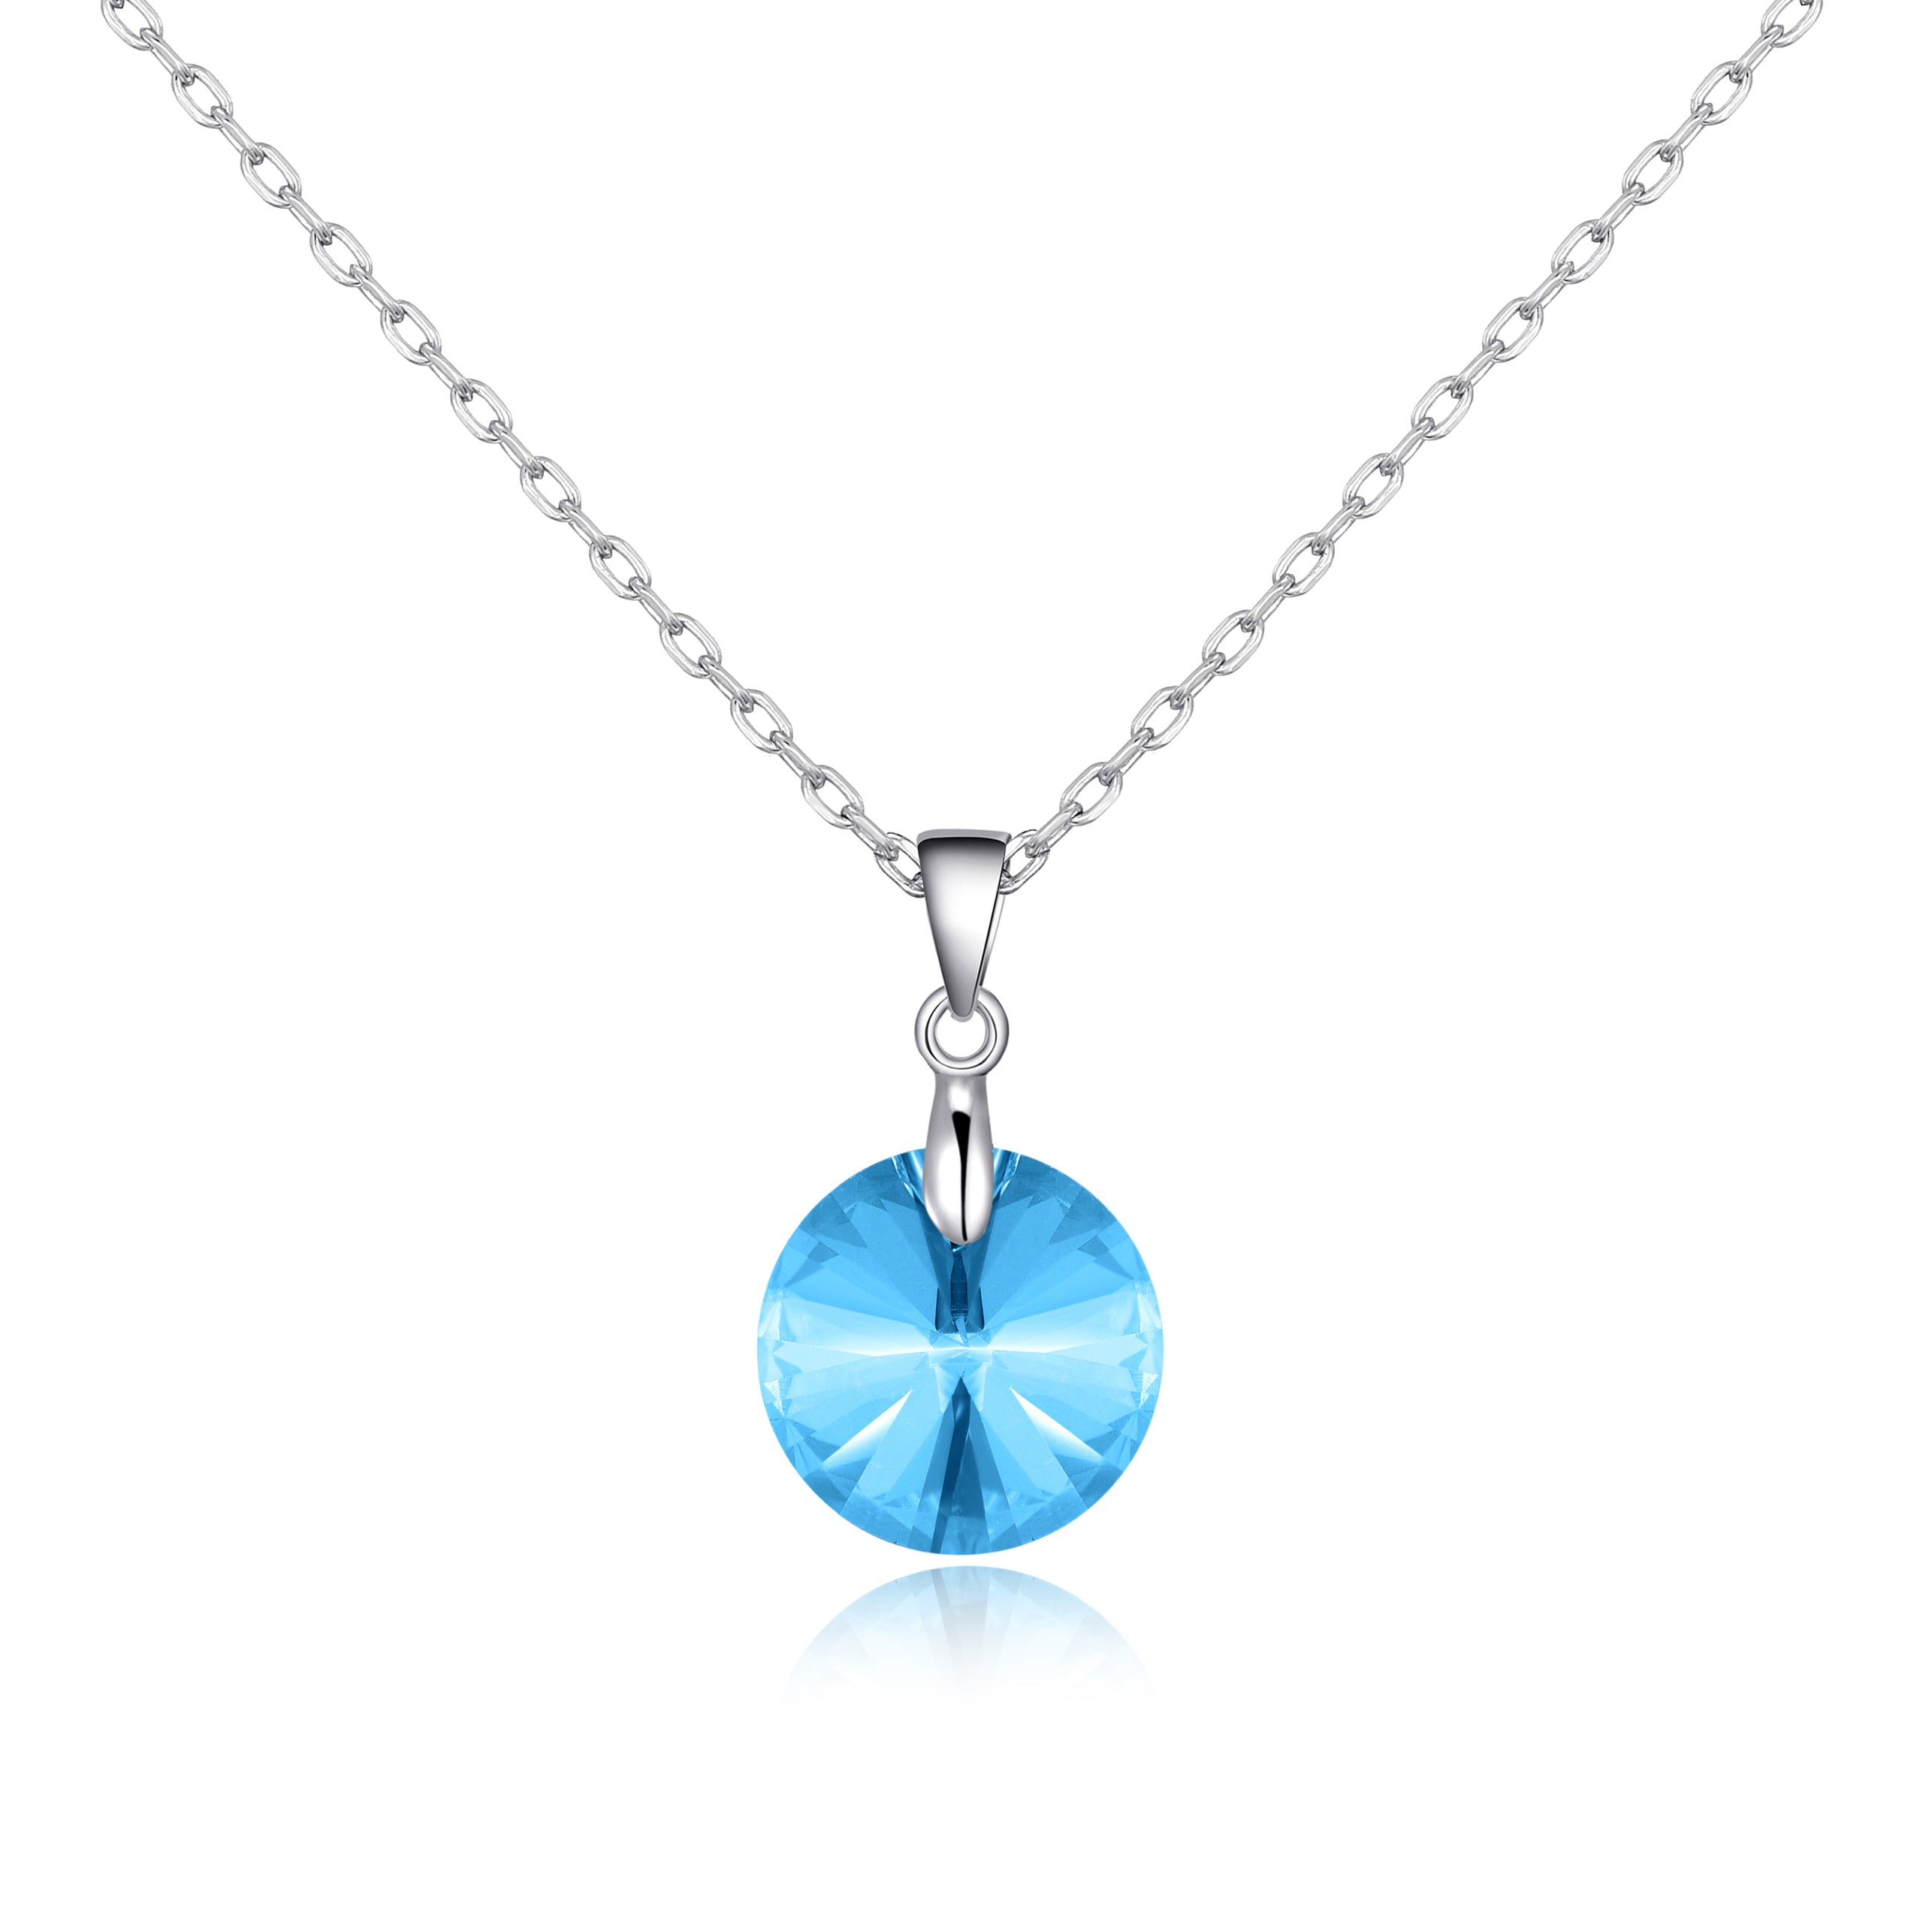 Sterling Silver Aquamarine Necklace Created with Zircondia® Crystals by Philip Jones Jewellery